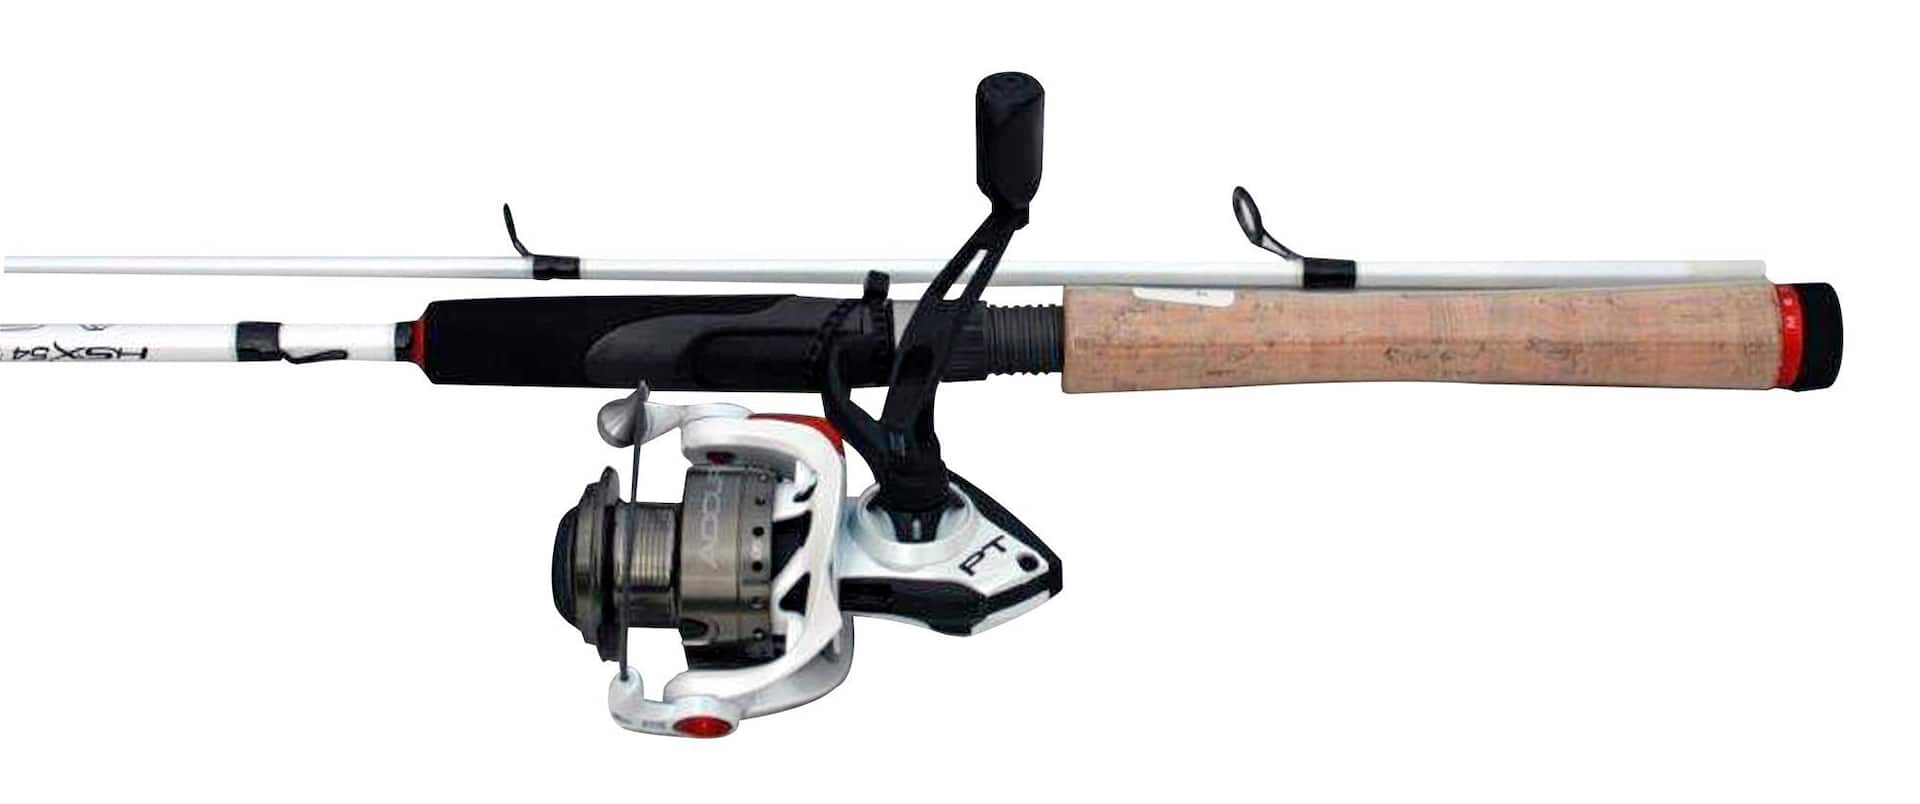 https://media-www.canadiantire.ca/product/playing/fishing/fishing-equipment/0742604/quantum-accurist-size-25-spinning-combo-2-piece-6-6--2b28c550-701d-4b08-9f8f-f903dab958ab-jpgrendition.jpg